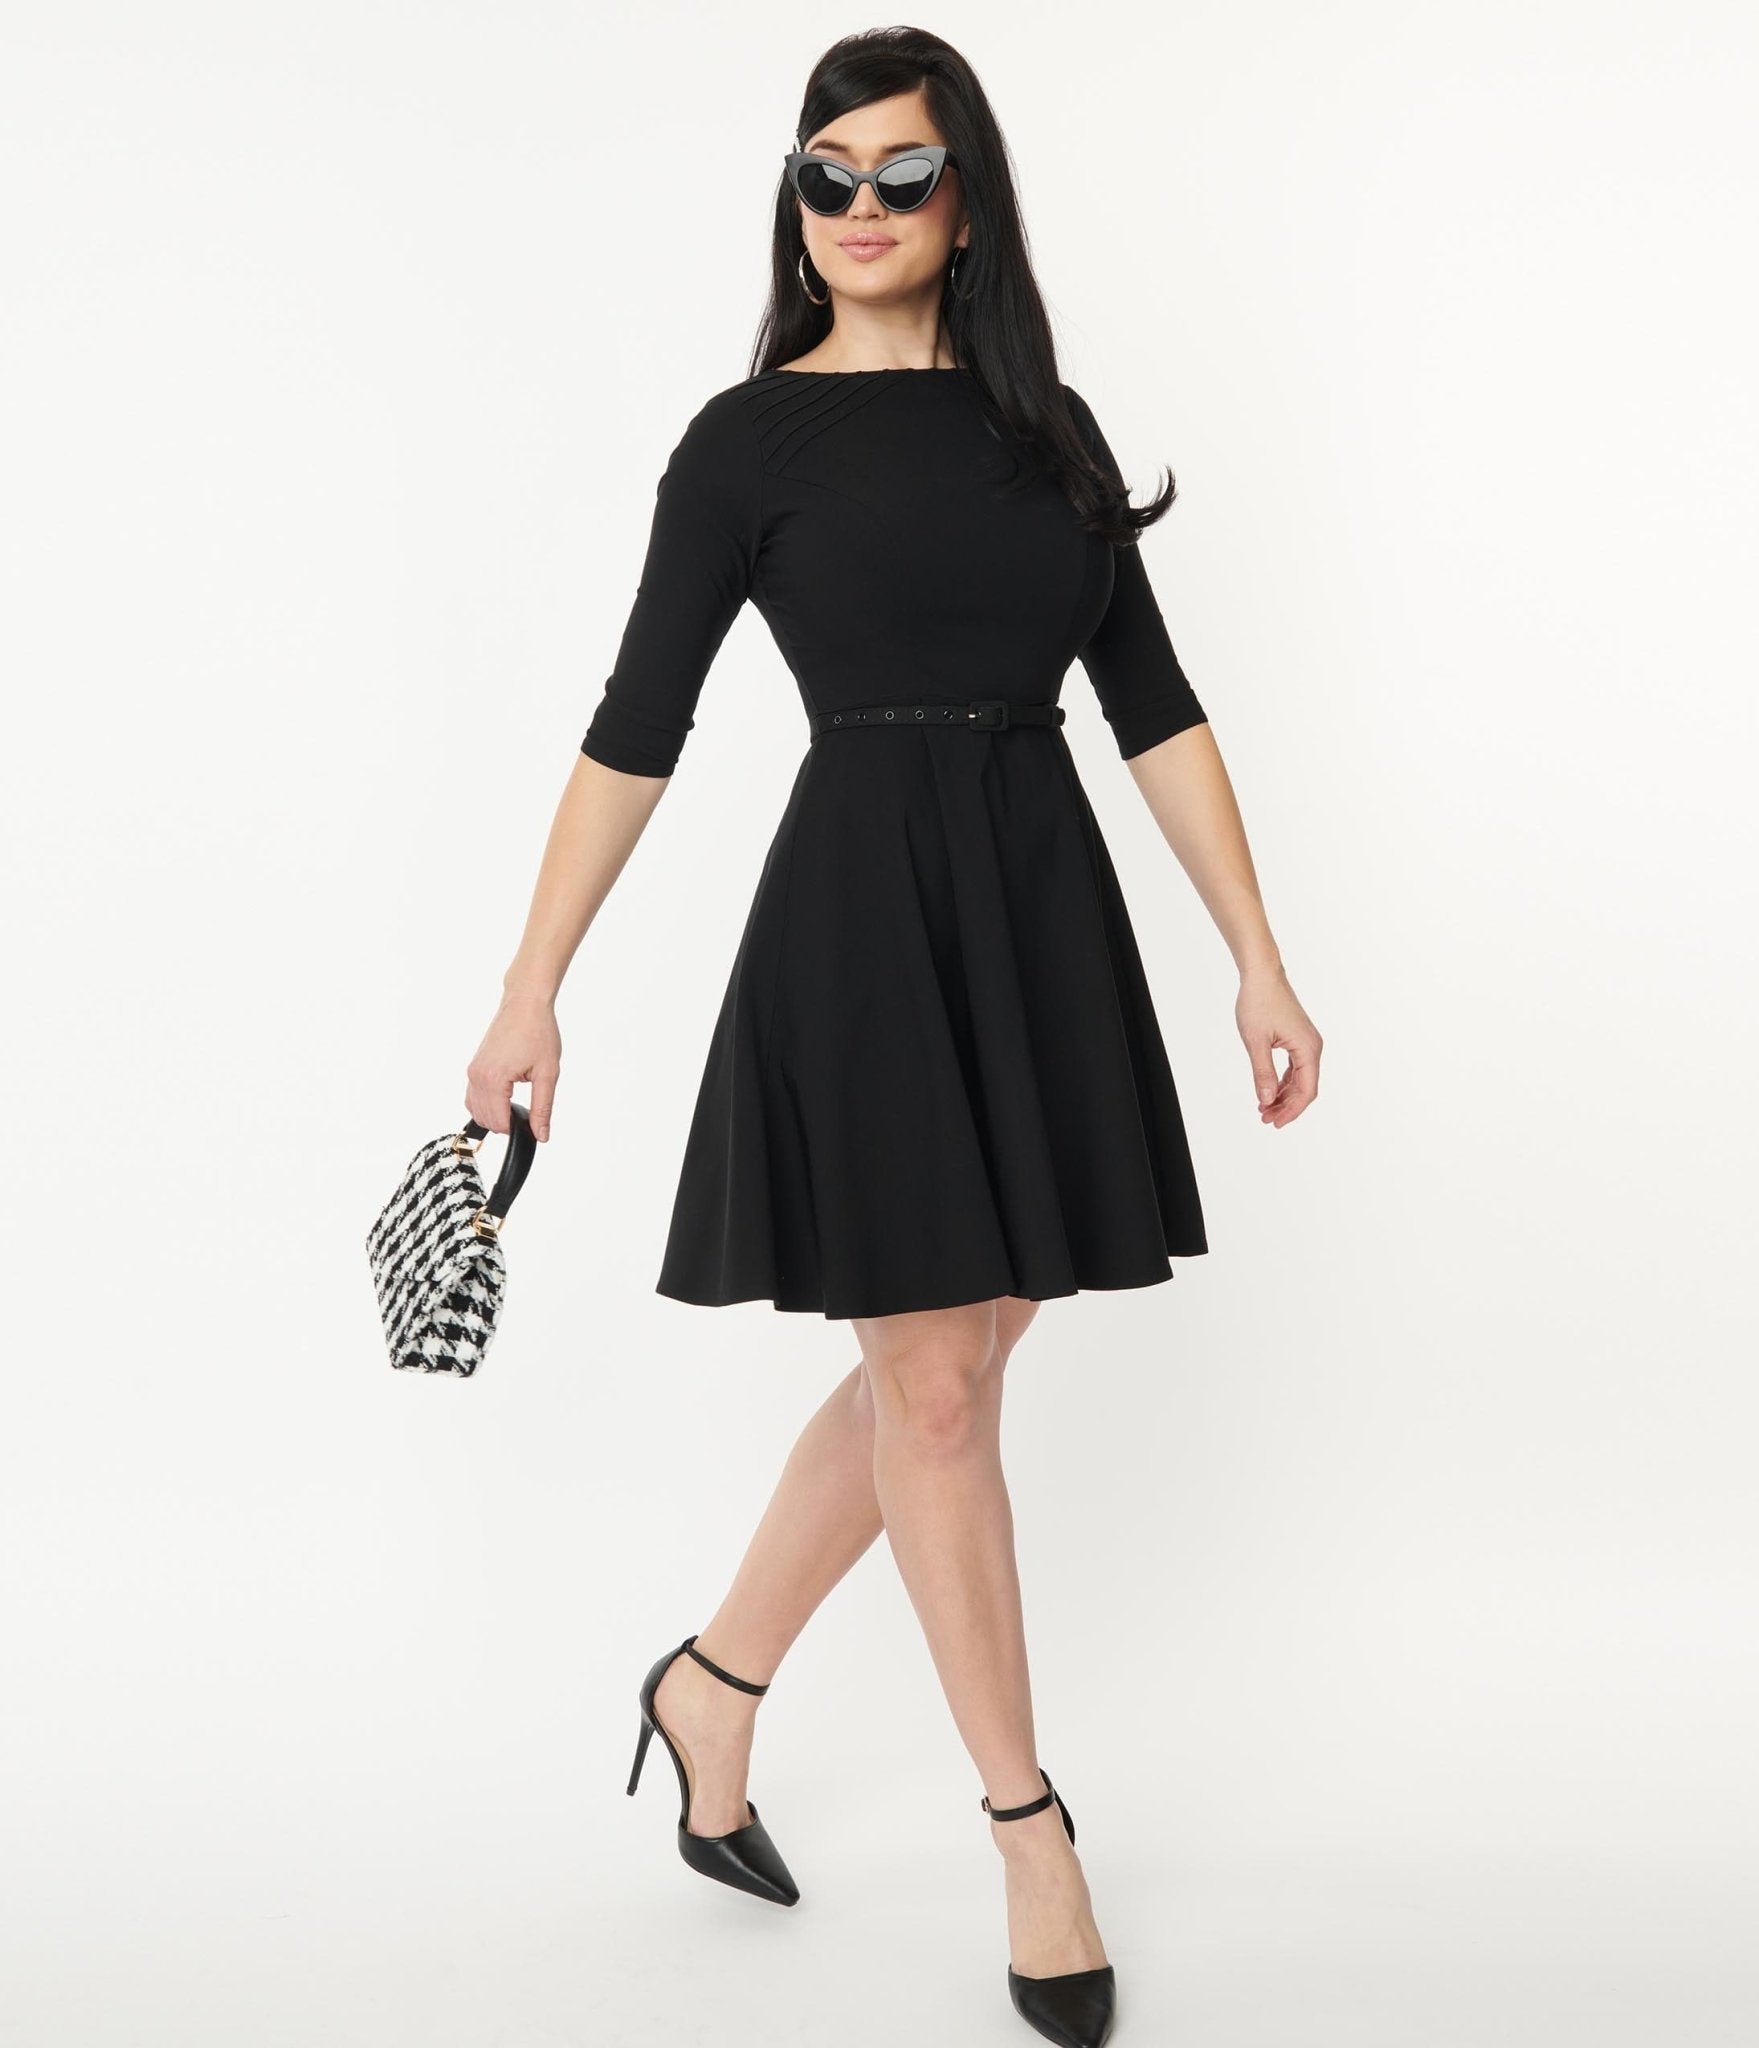 fit and flare black dress